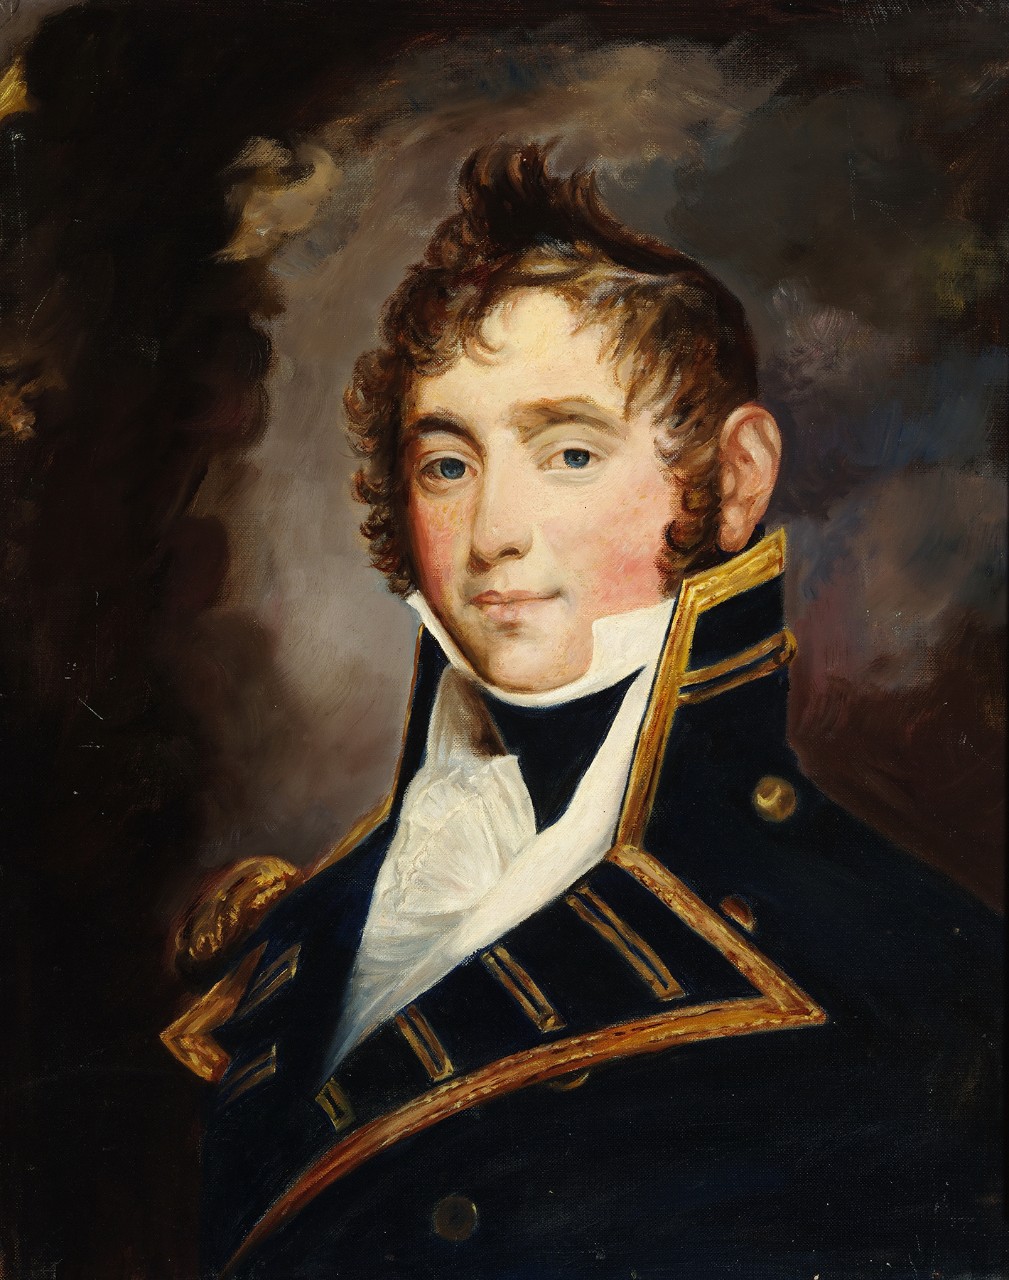 Protrait of Captain James Lawrence with a smoke background